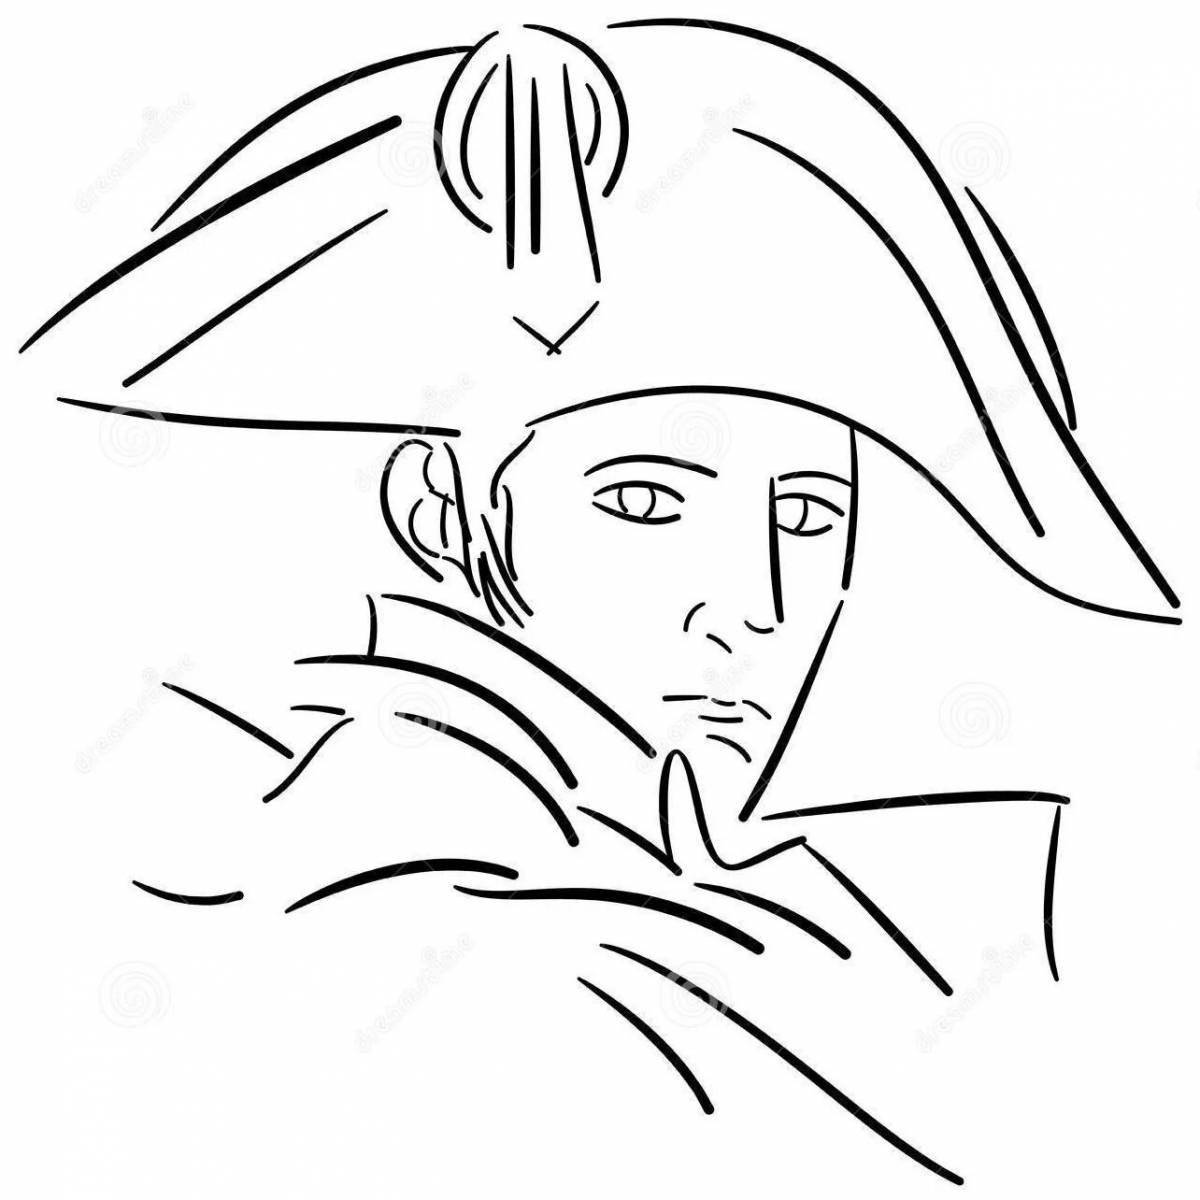 Colorful napoleon coloring page